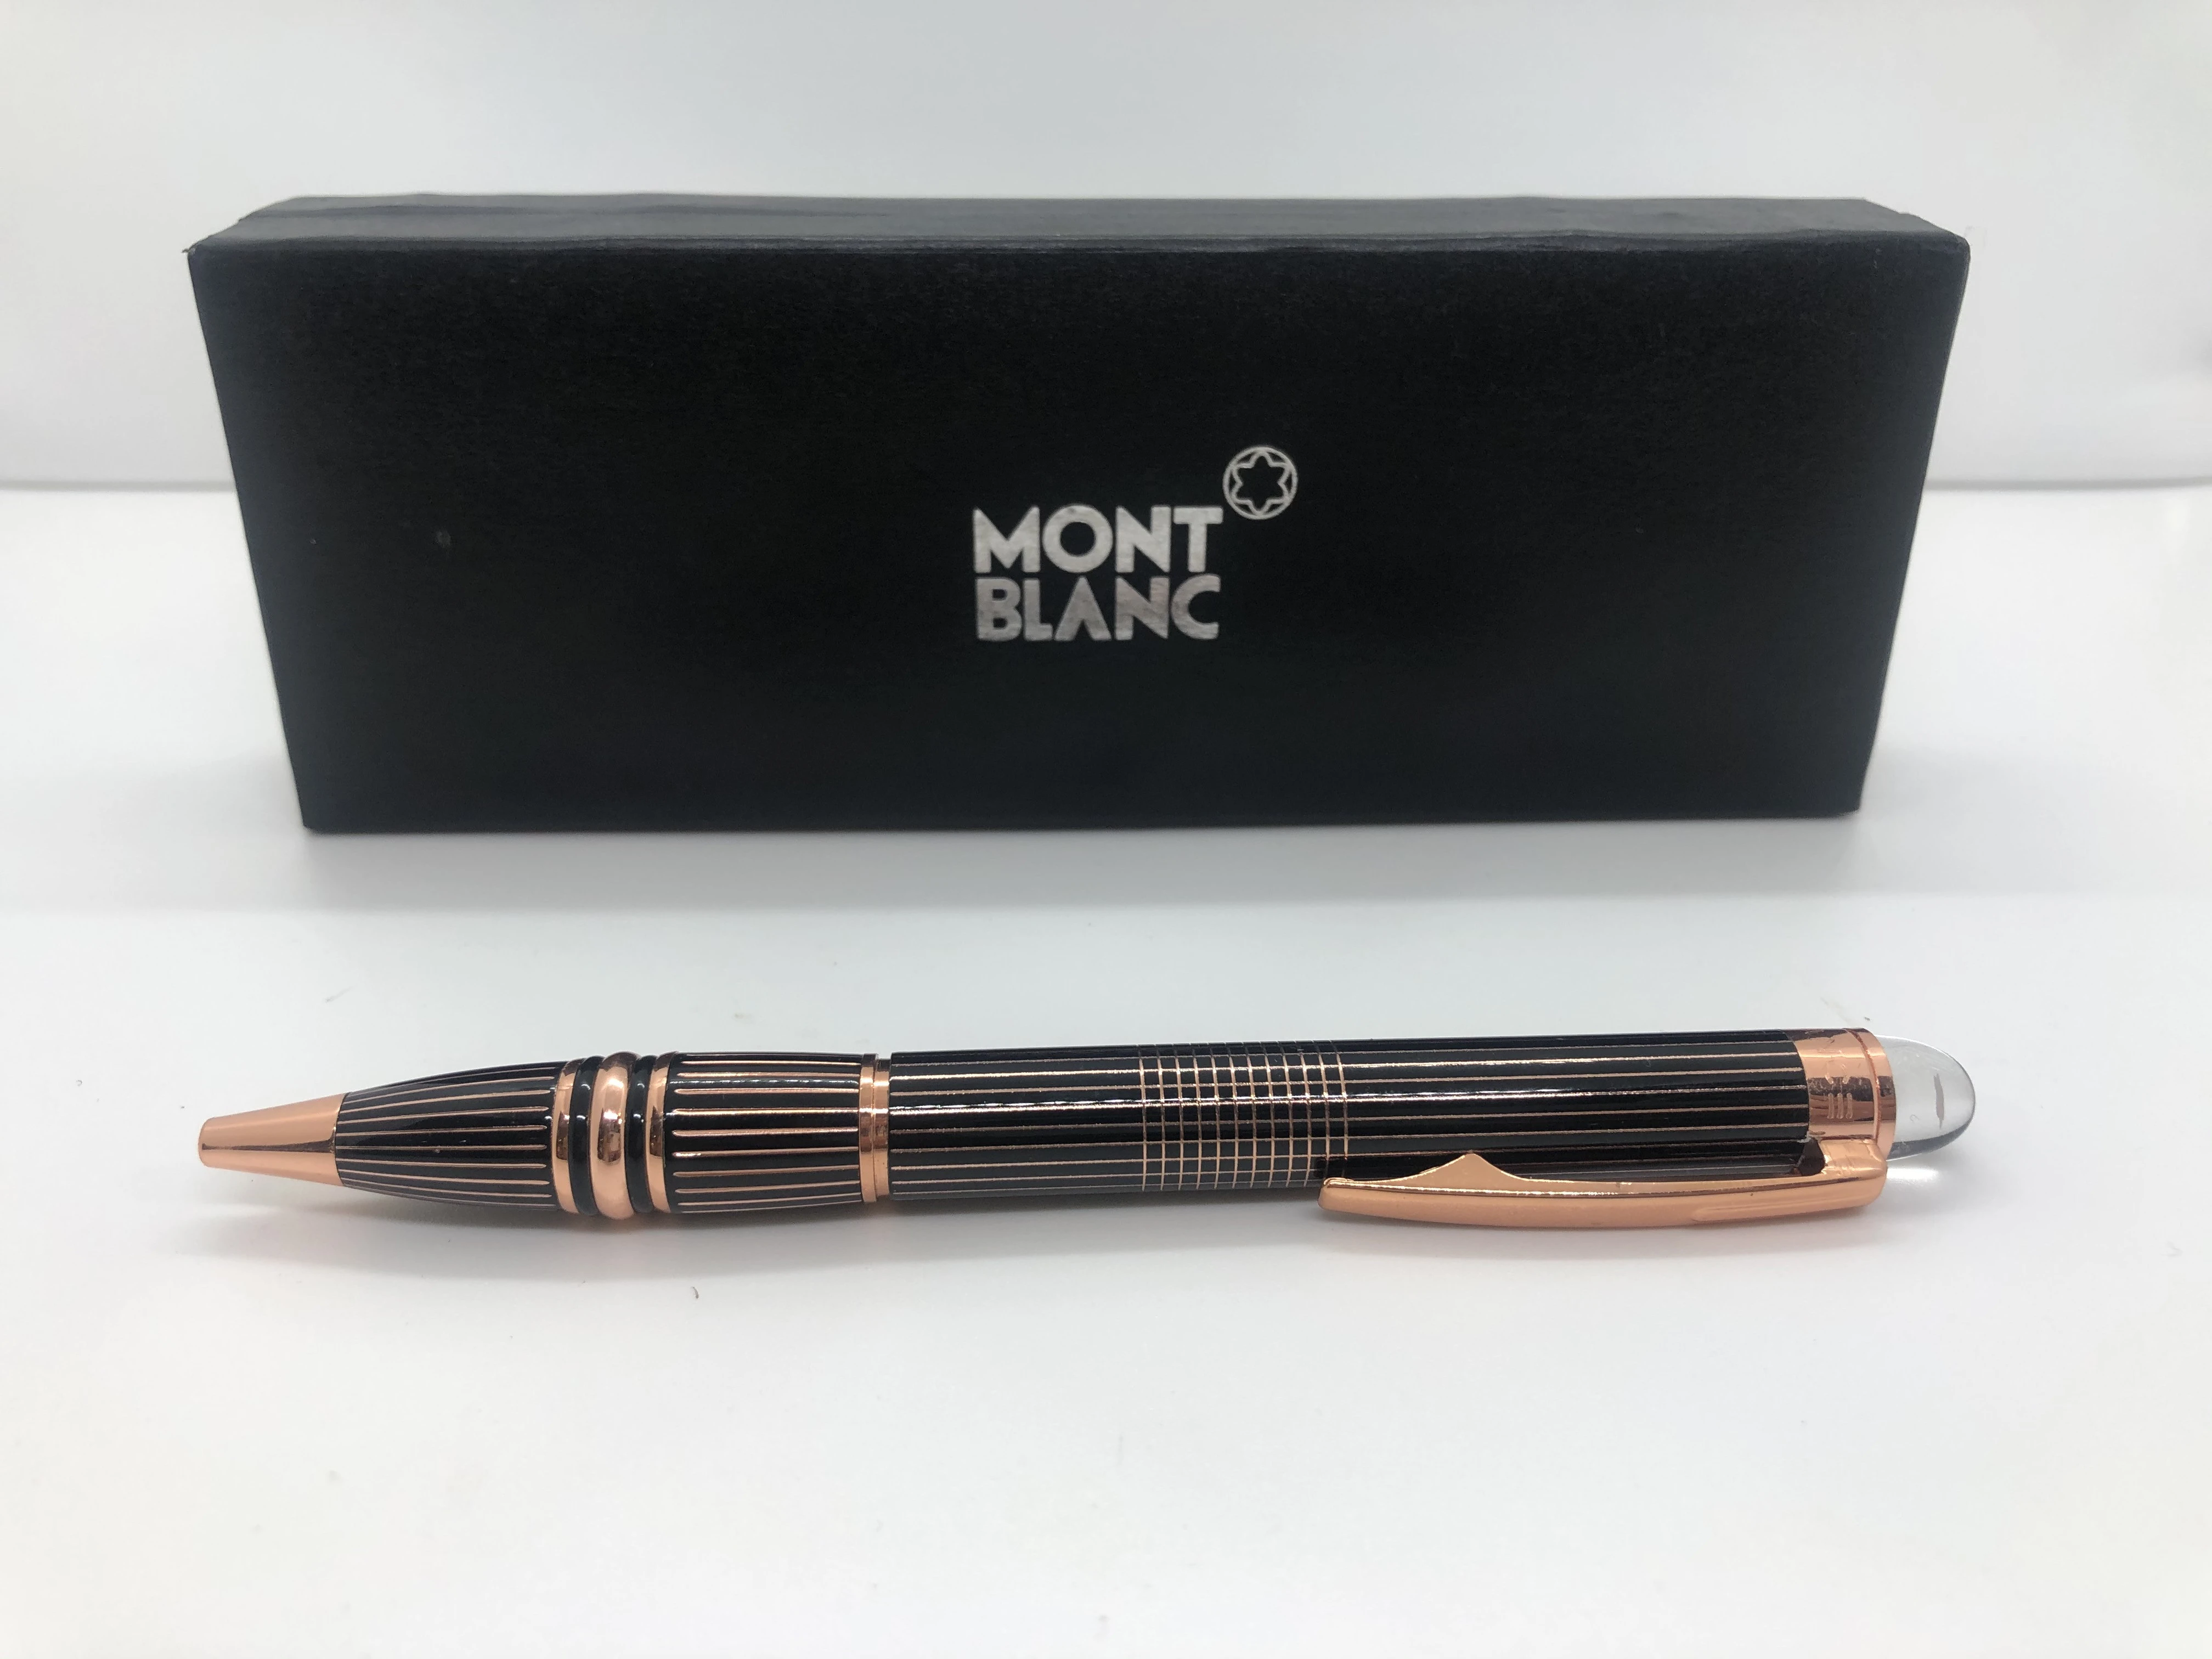 Mont Blanc pen black * rose gold - with engraved touches - with the star brand logo on the top engraved in the rotation